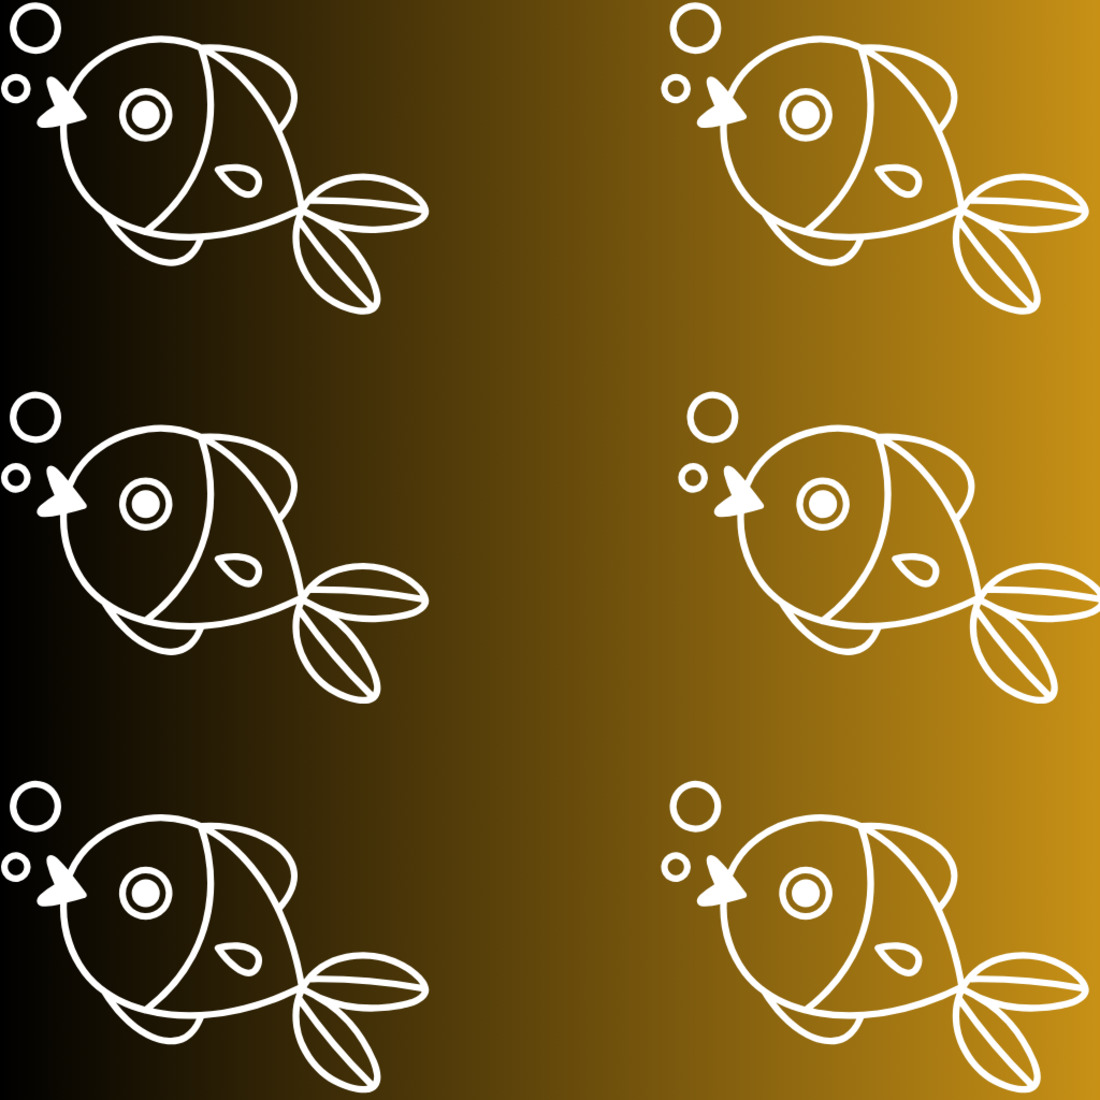 Aquatic Icons: 5 Fin-tastic Fish PNGs for Creative Projects preview image.